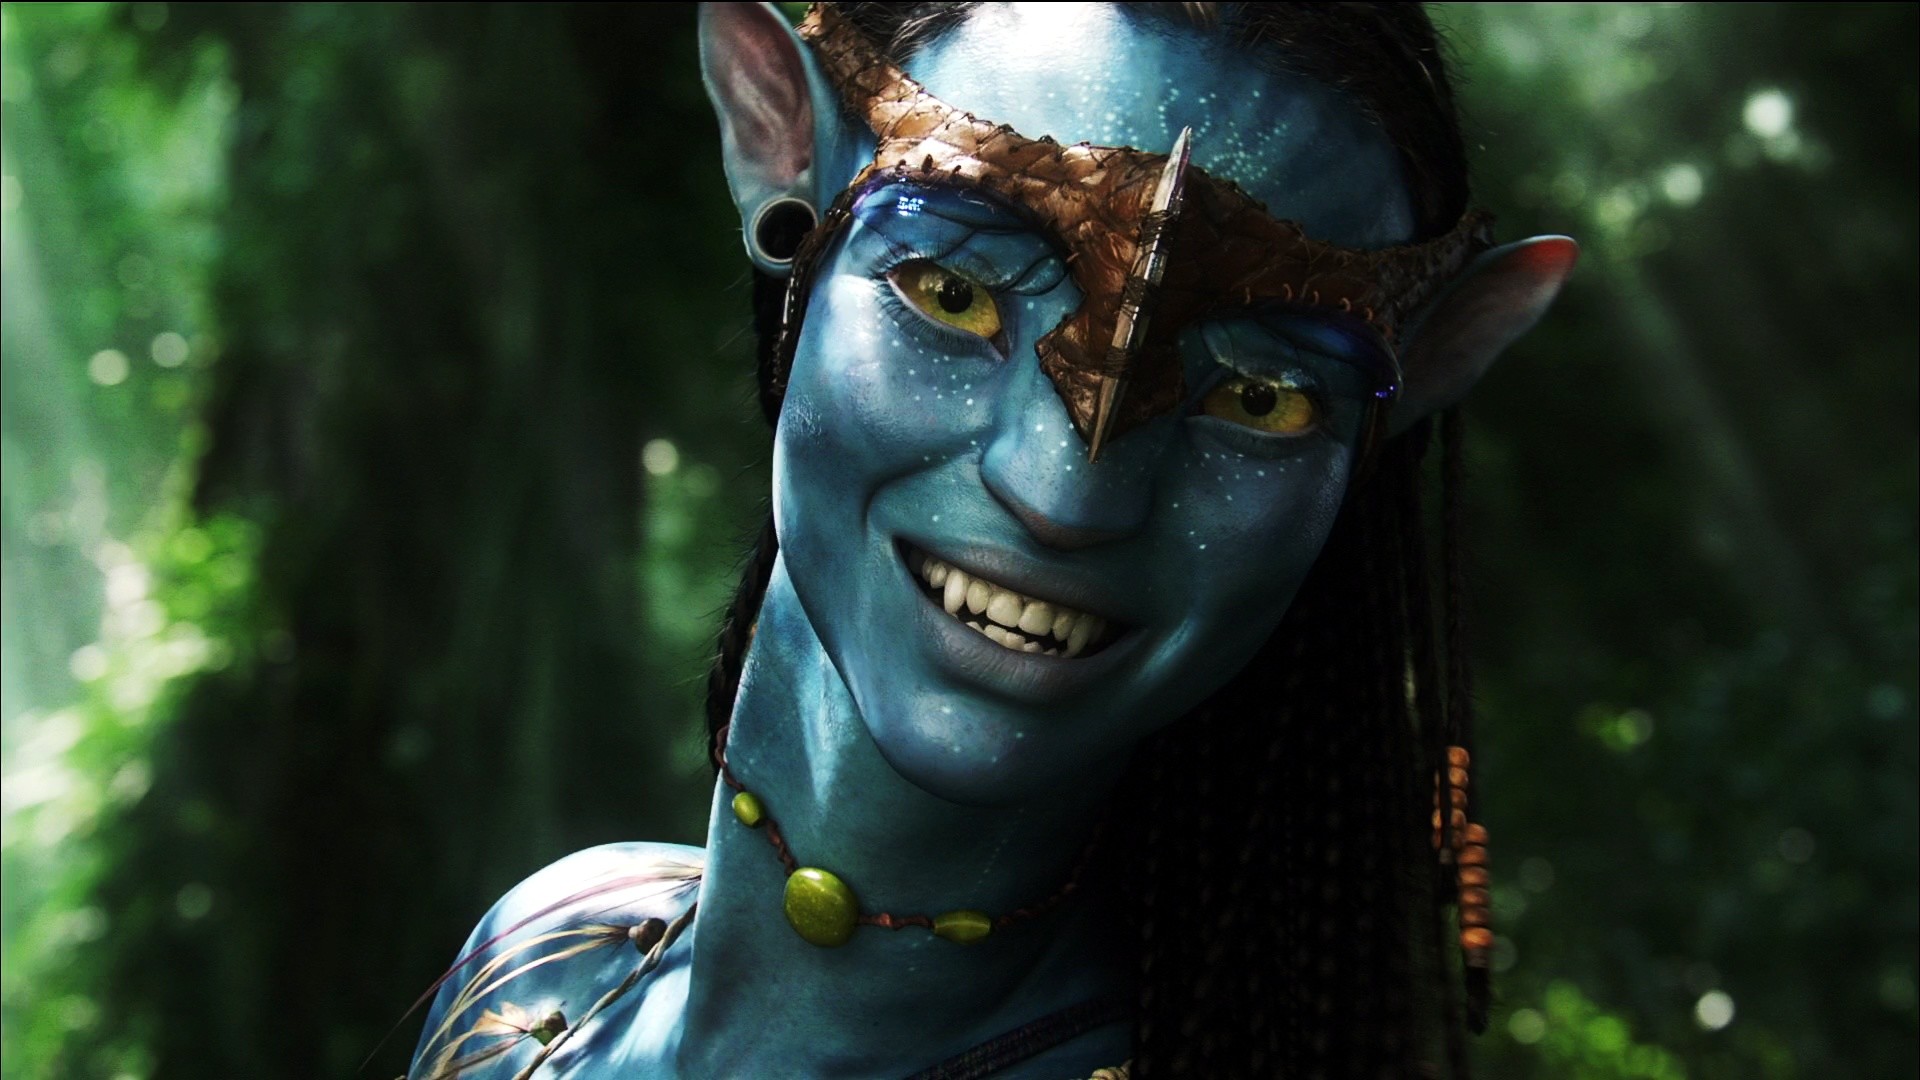 An image from the avatar movie series avatar 2 4K wallpaper download